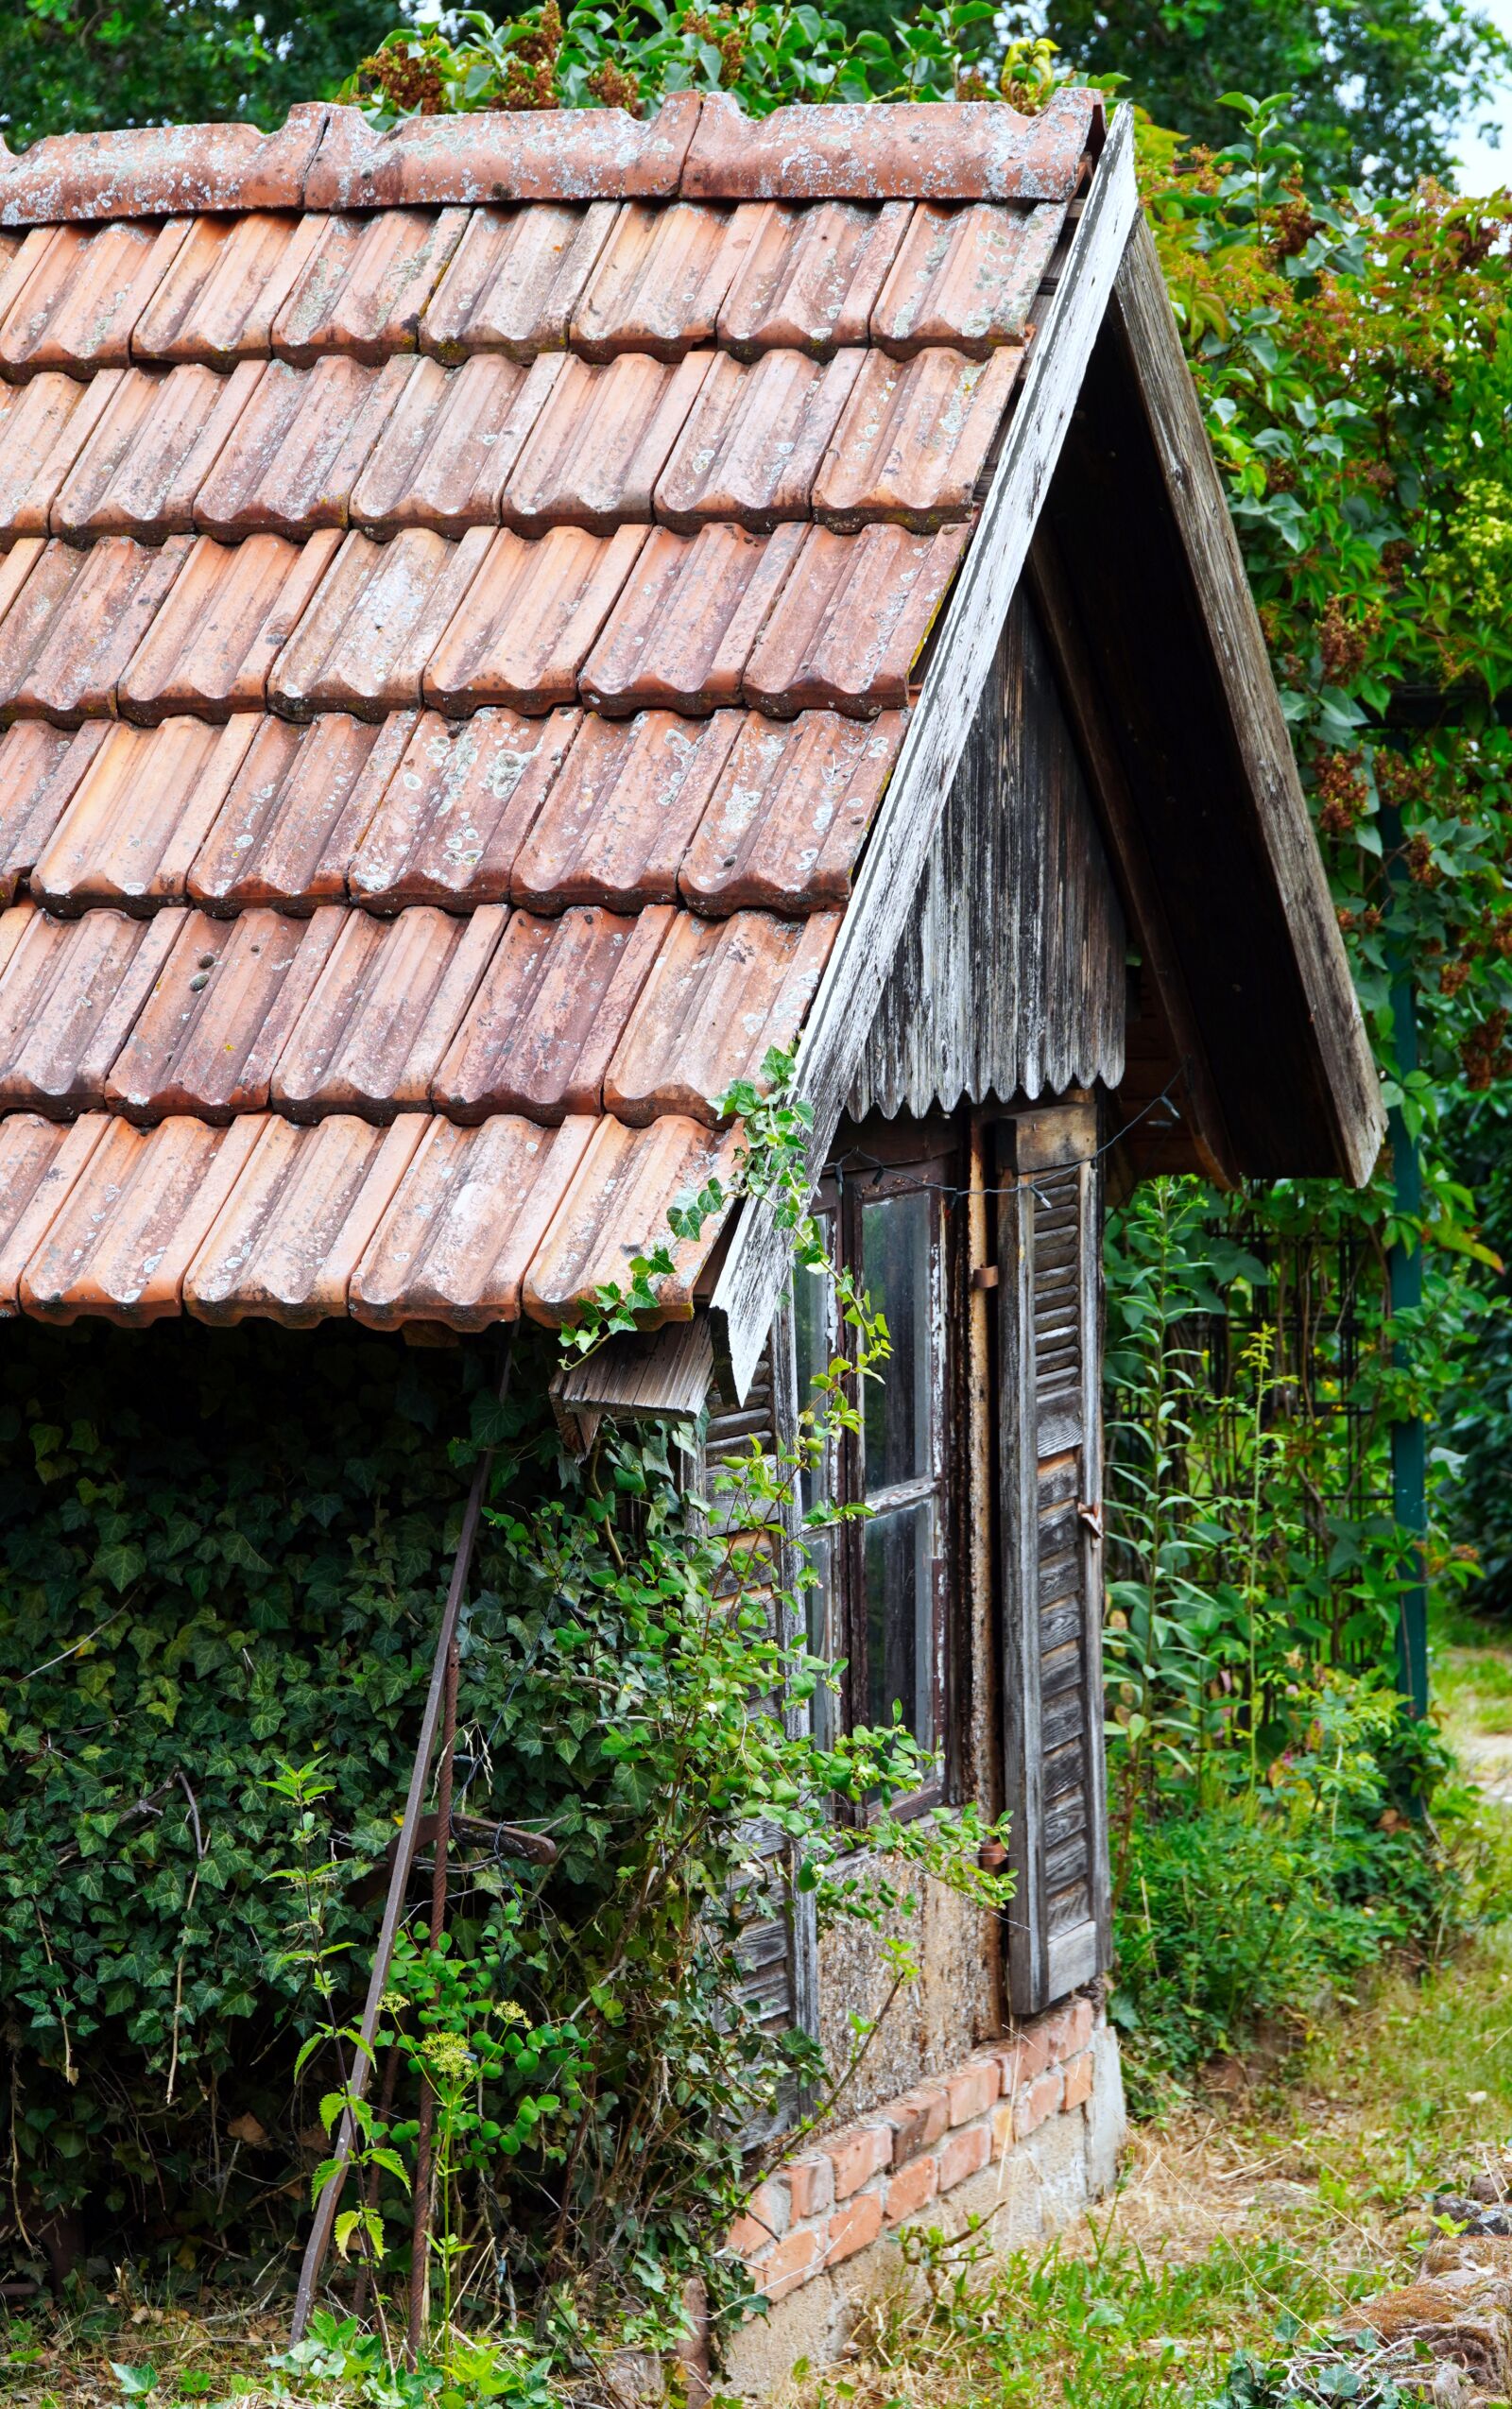 Sony a6400 sample photo. House, old, garden shed photography